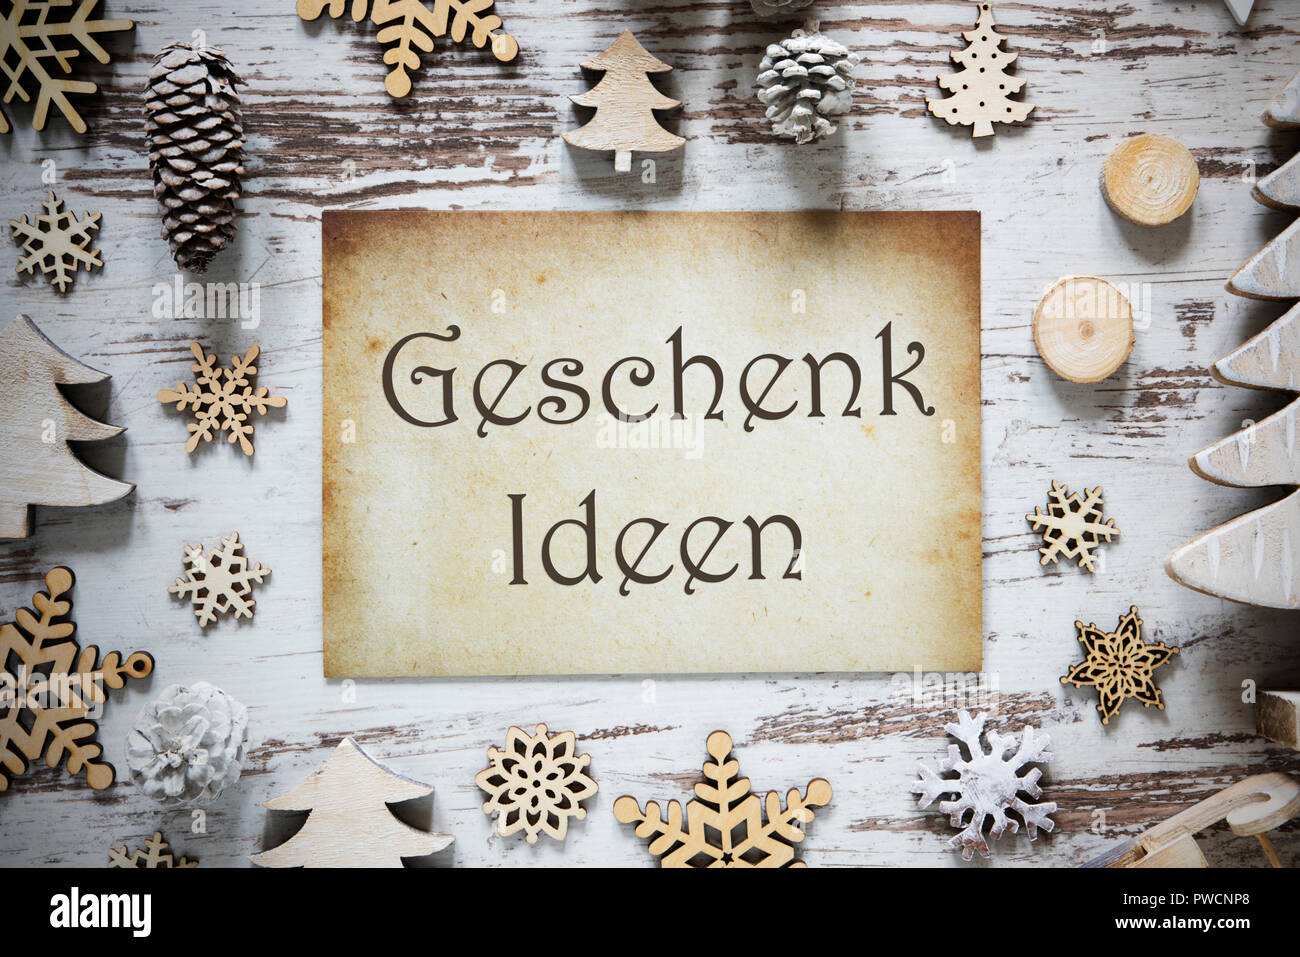 Rustic Christmas Decoration, Paper, Geschenk Ideen Means Gift Idea Stock Photo